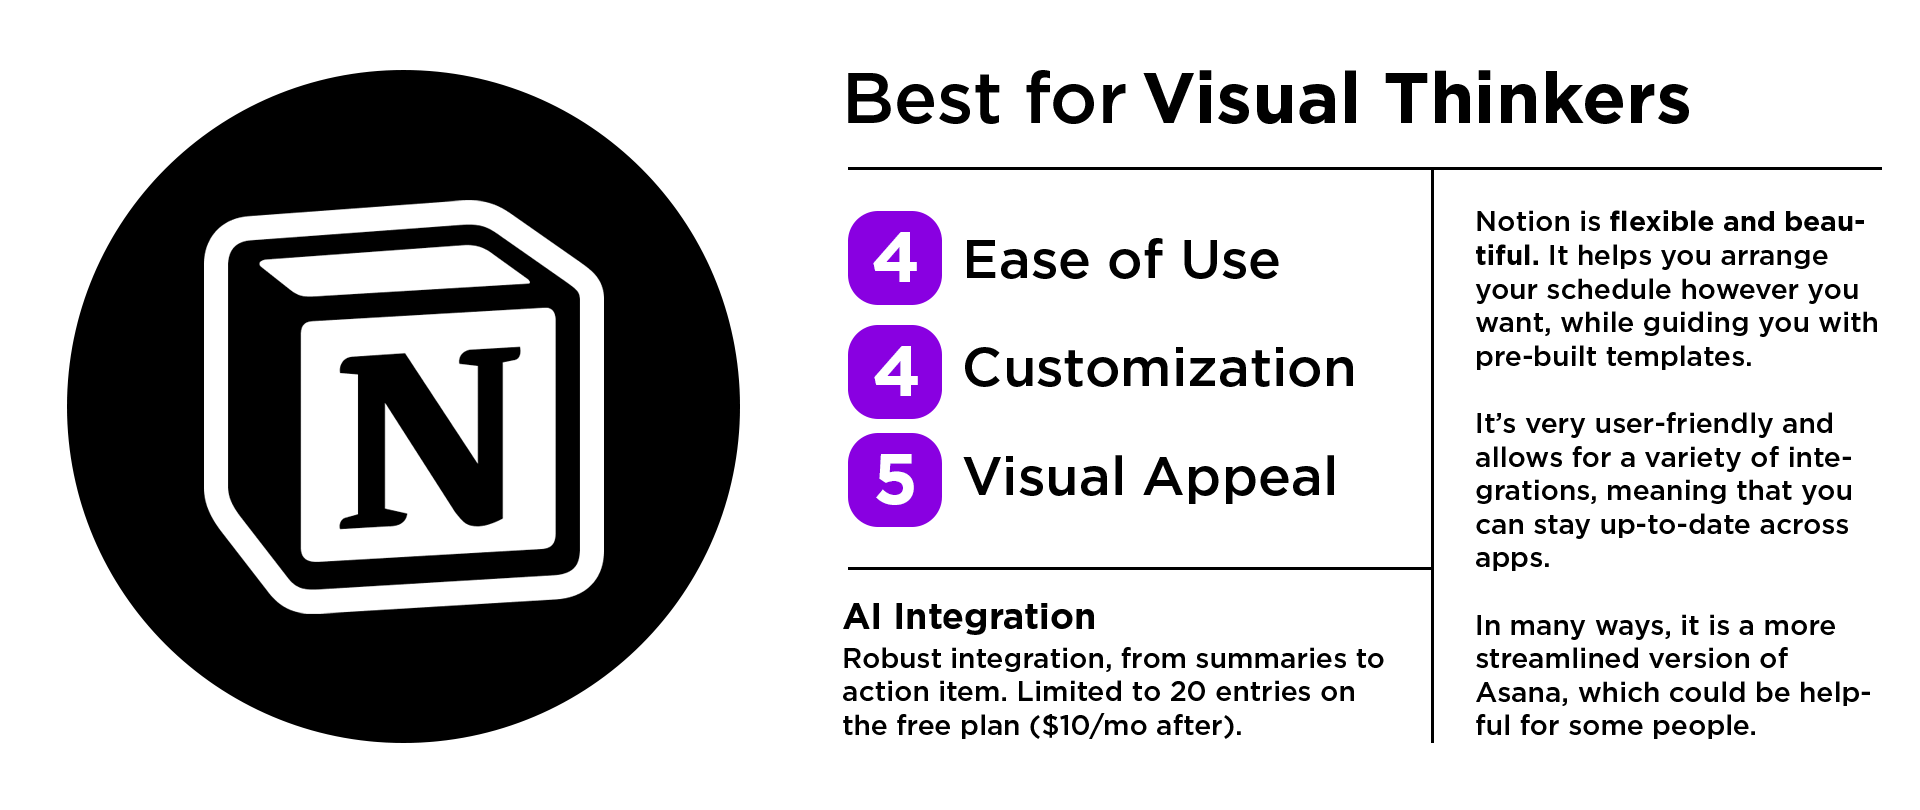 A ranking of Notion as an organization app on a scale of 1 to 5: 4 for the ease of use; 4 for customization; and 5 for visual appeal.